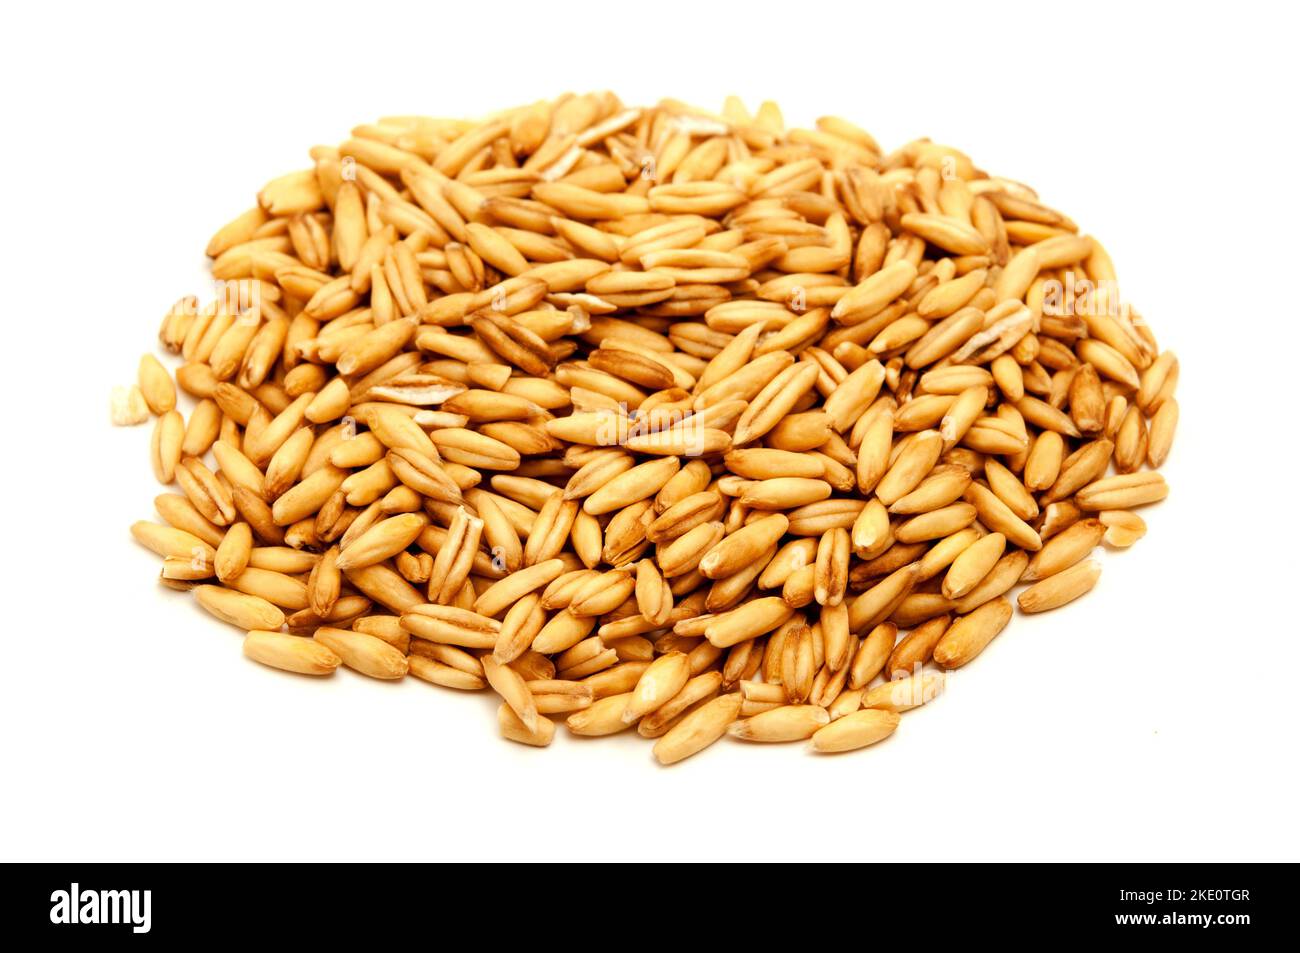 Oat grains on a white background Stock Photo